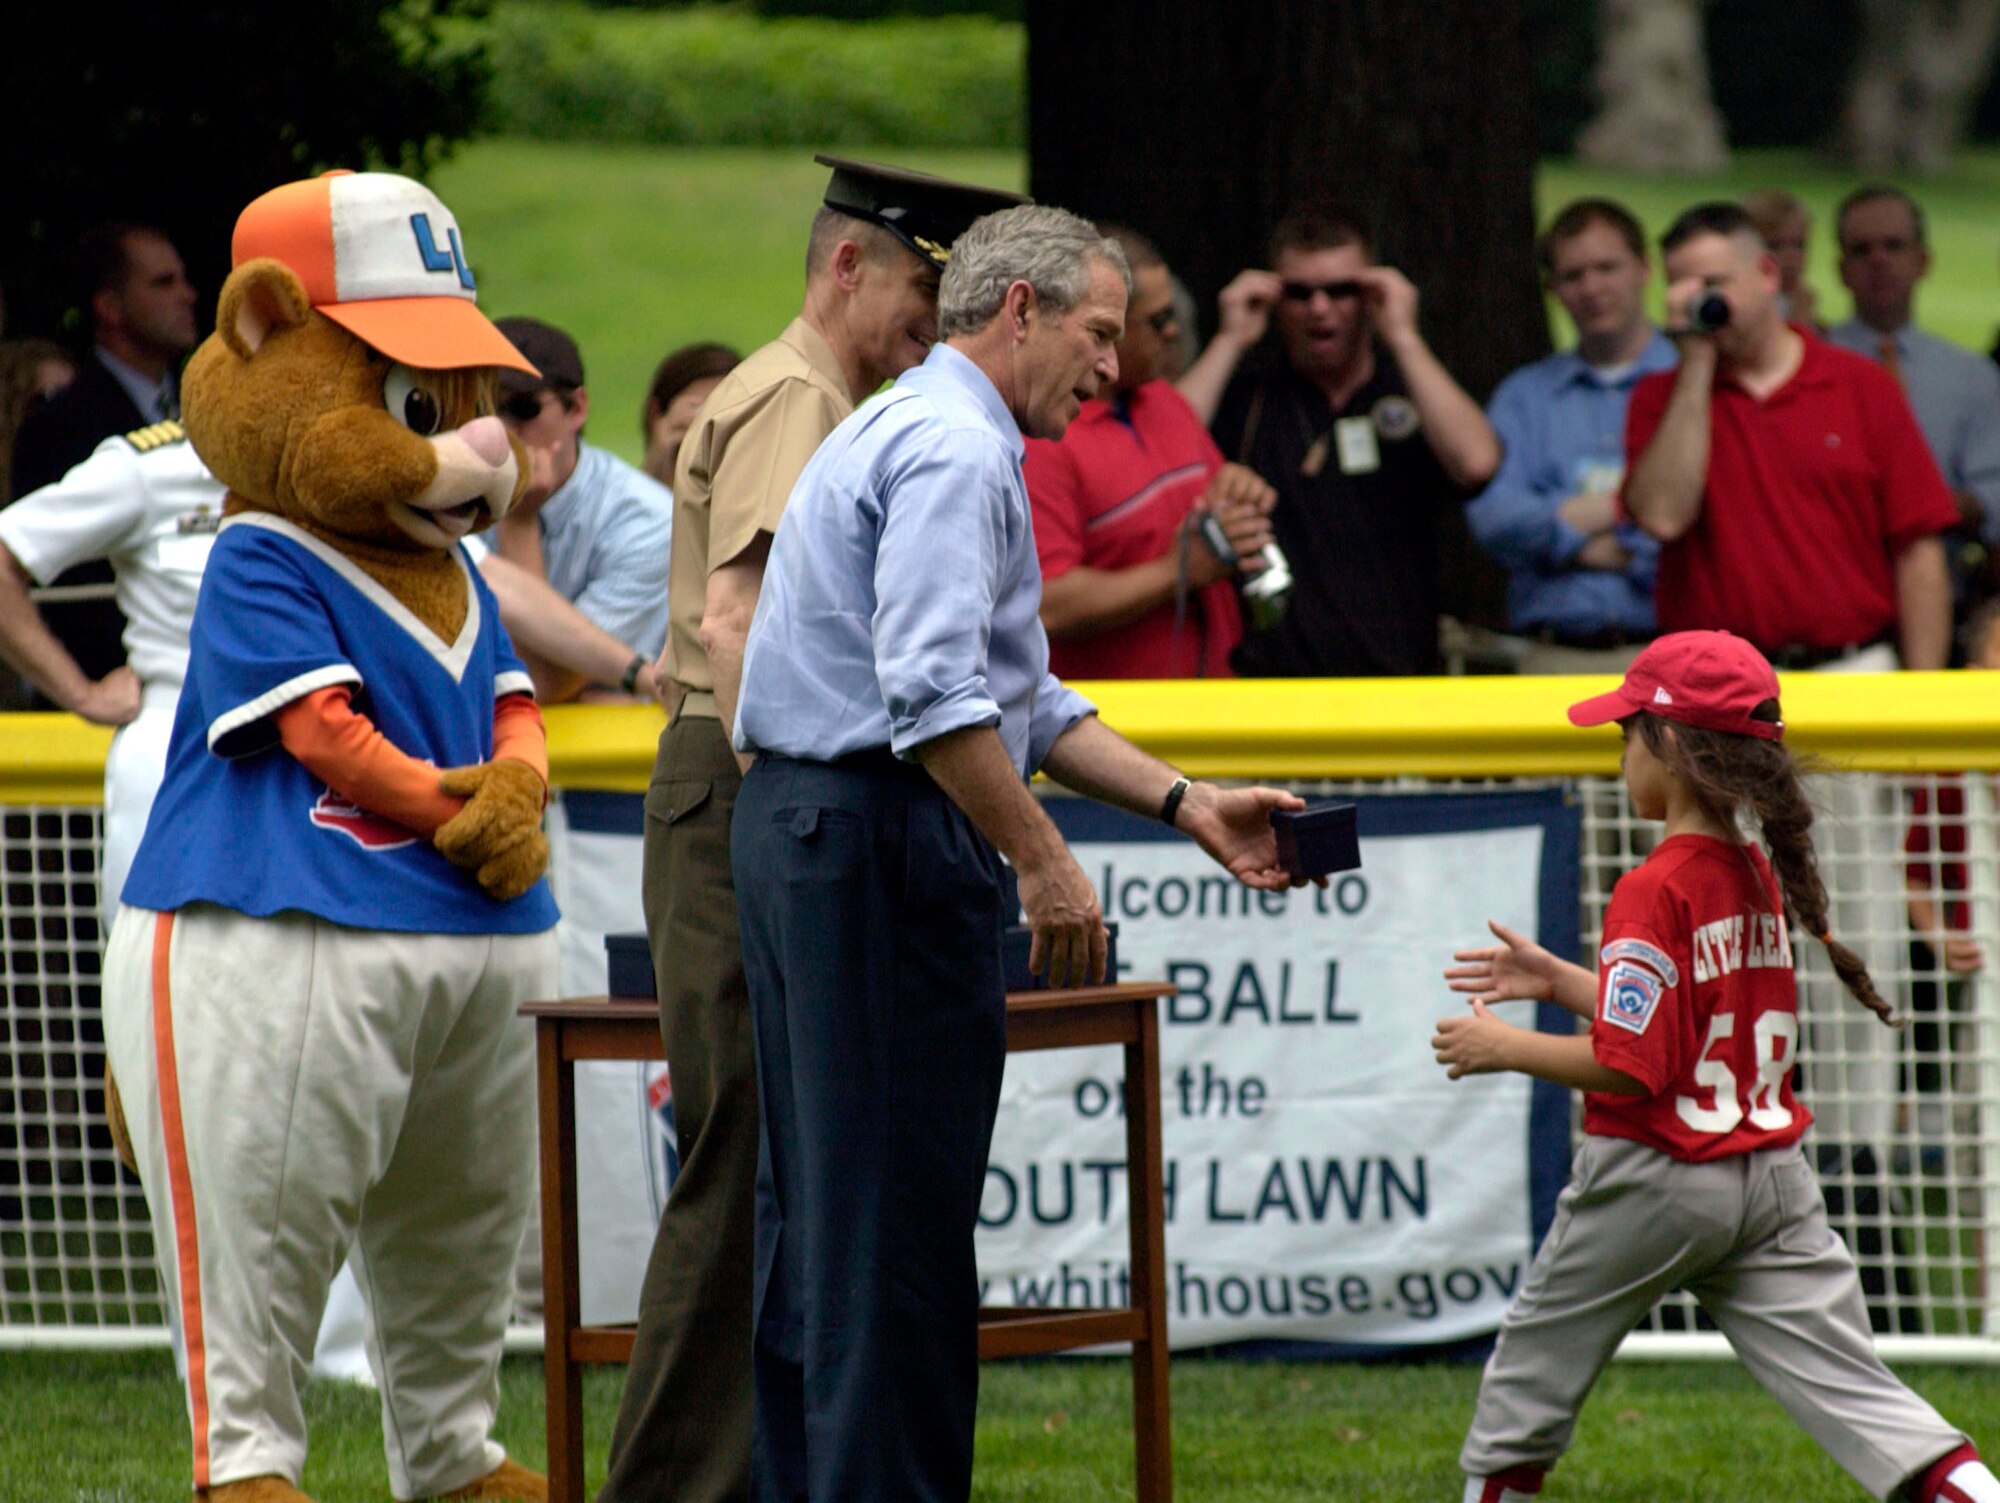 President George W. Bush gives a ceremonial ball to Mia Martin of the McGuire AFB, N.J., Little League Yankees at the conclusion of the "Tee Ball on the South Lawn" game on Friday, June 23. The Little League mascot, Dugout, and Gen. Peter Pace, chairman of the Joint Chiefs of Staff add their congratulations.  The game marked the official start of the Little League season.  The Yankees played against the Dolcom Little League Indians of Naval Submarine Base New London, Groton, Conn. (U.S. Air Force photo/Tech. Sgt. Cohen A. Young)